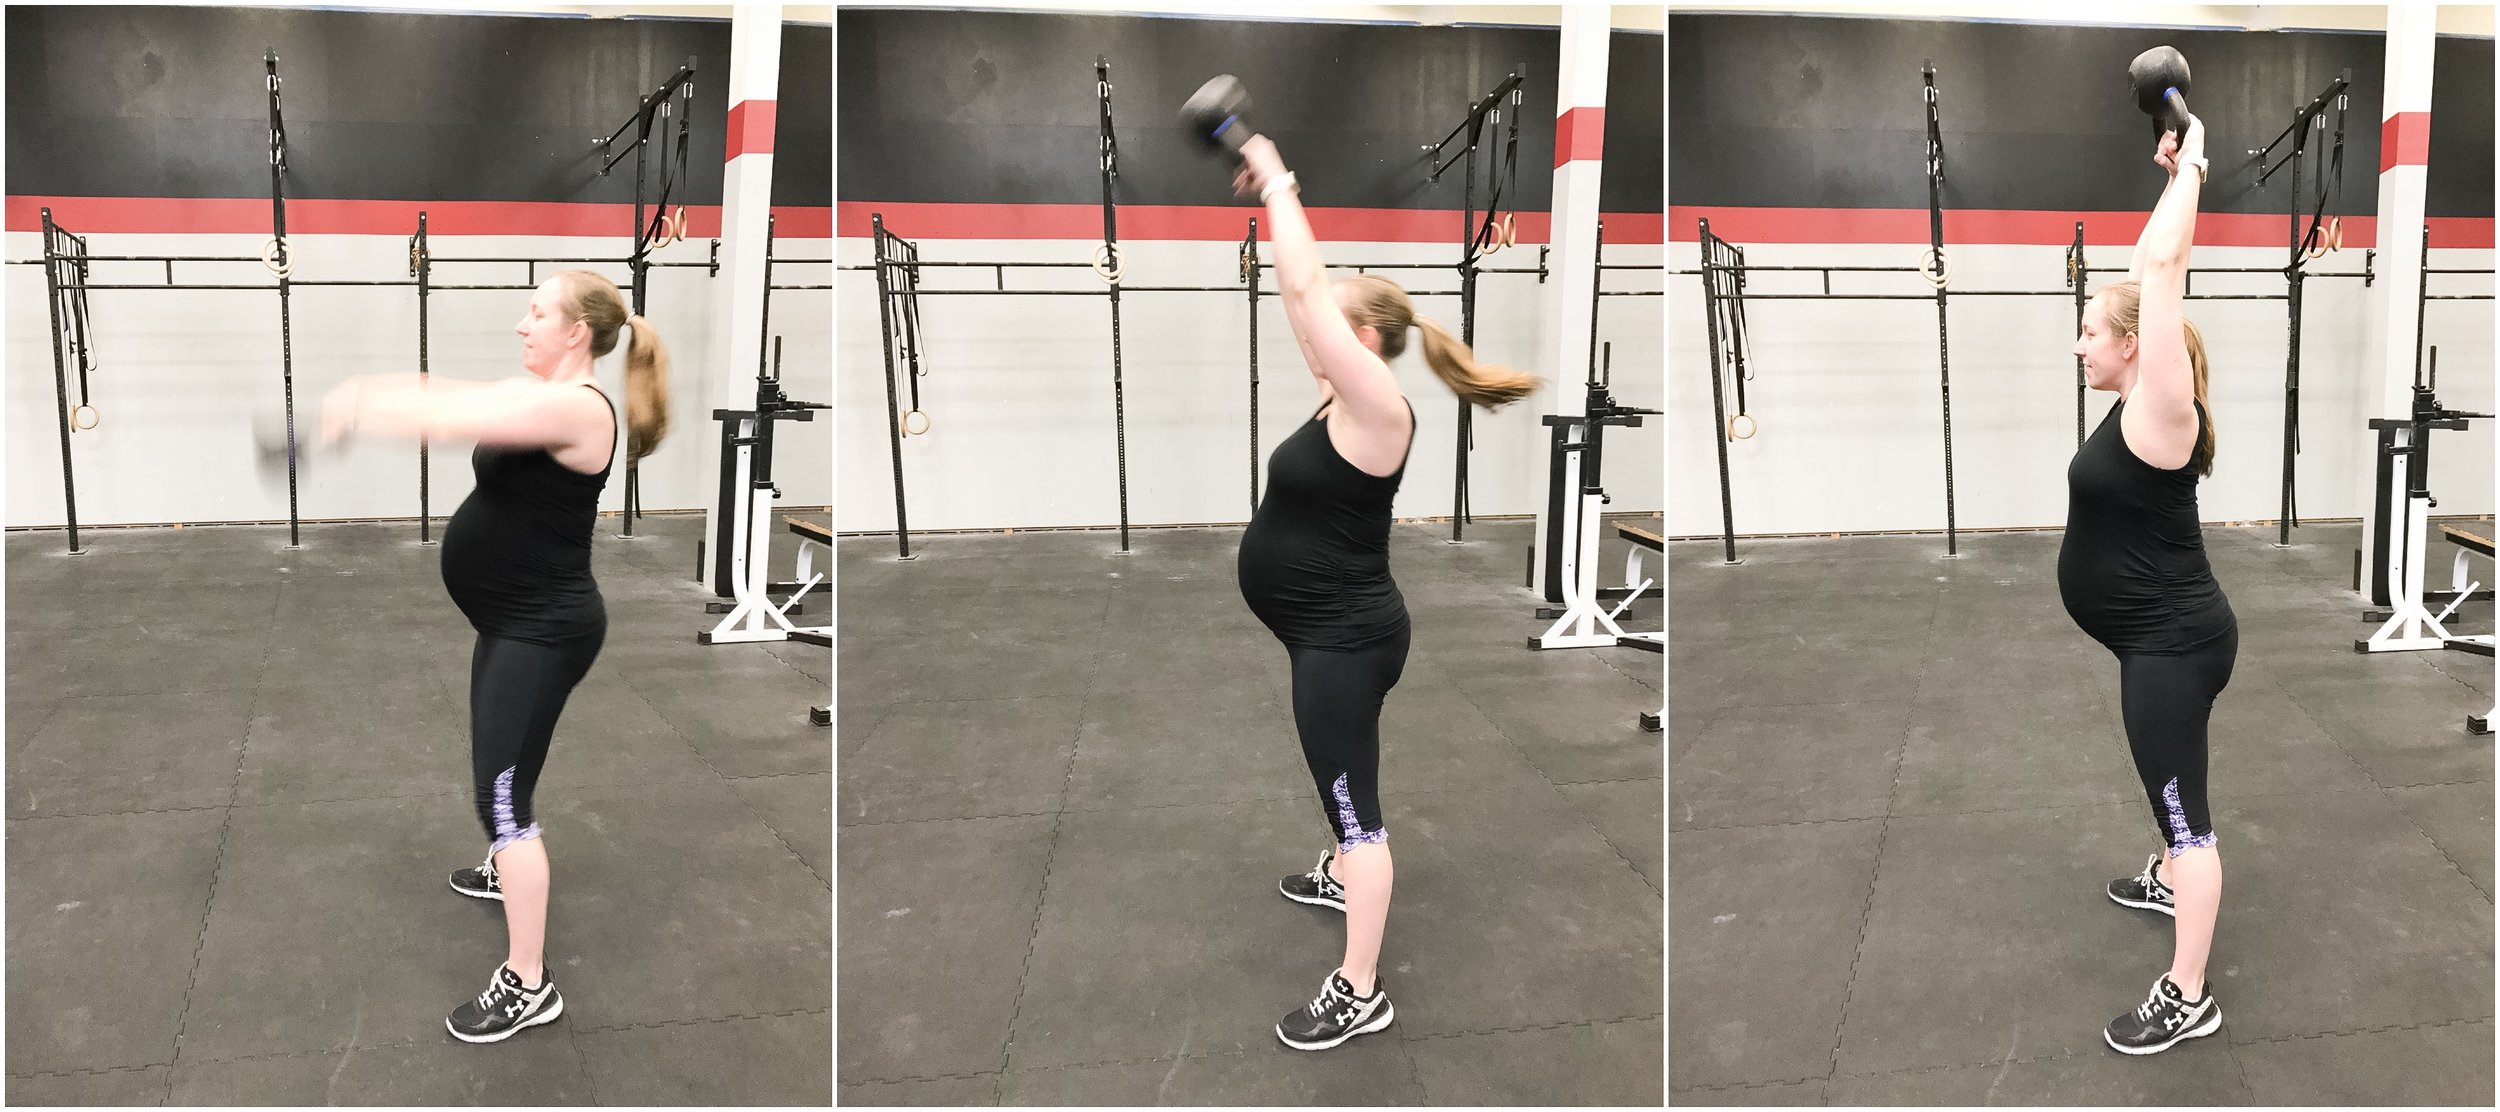  Kettlebell swings! In the first and second trimester I used the normal 35lbs but in the third trimester I used 25lbs. 